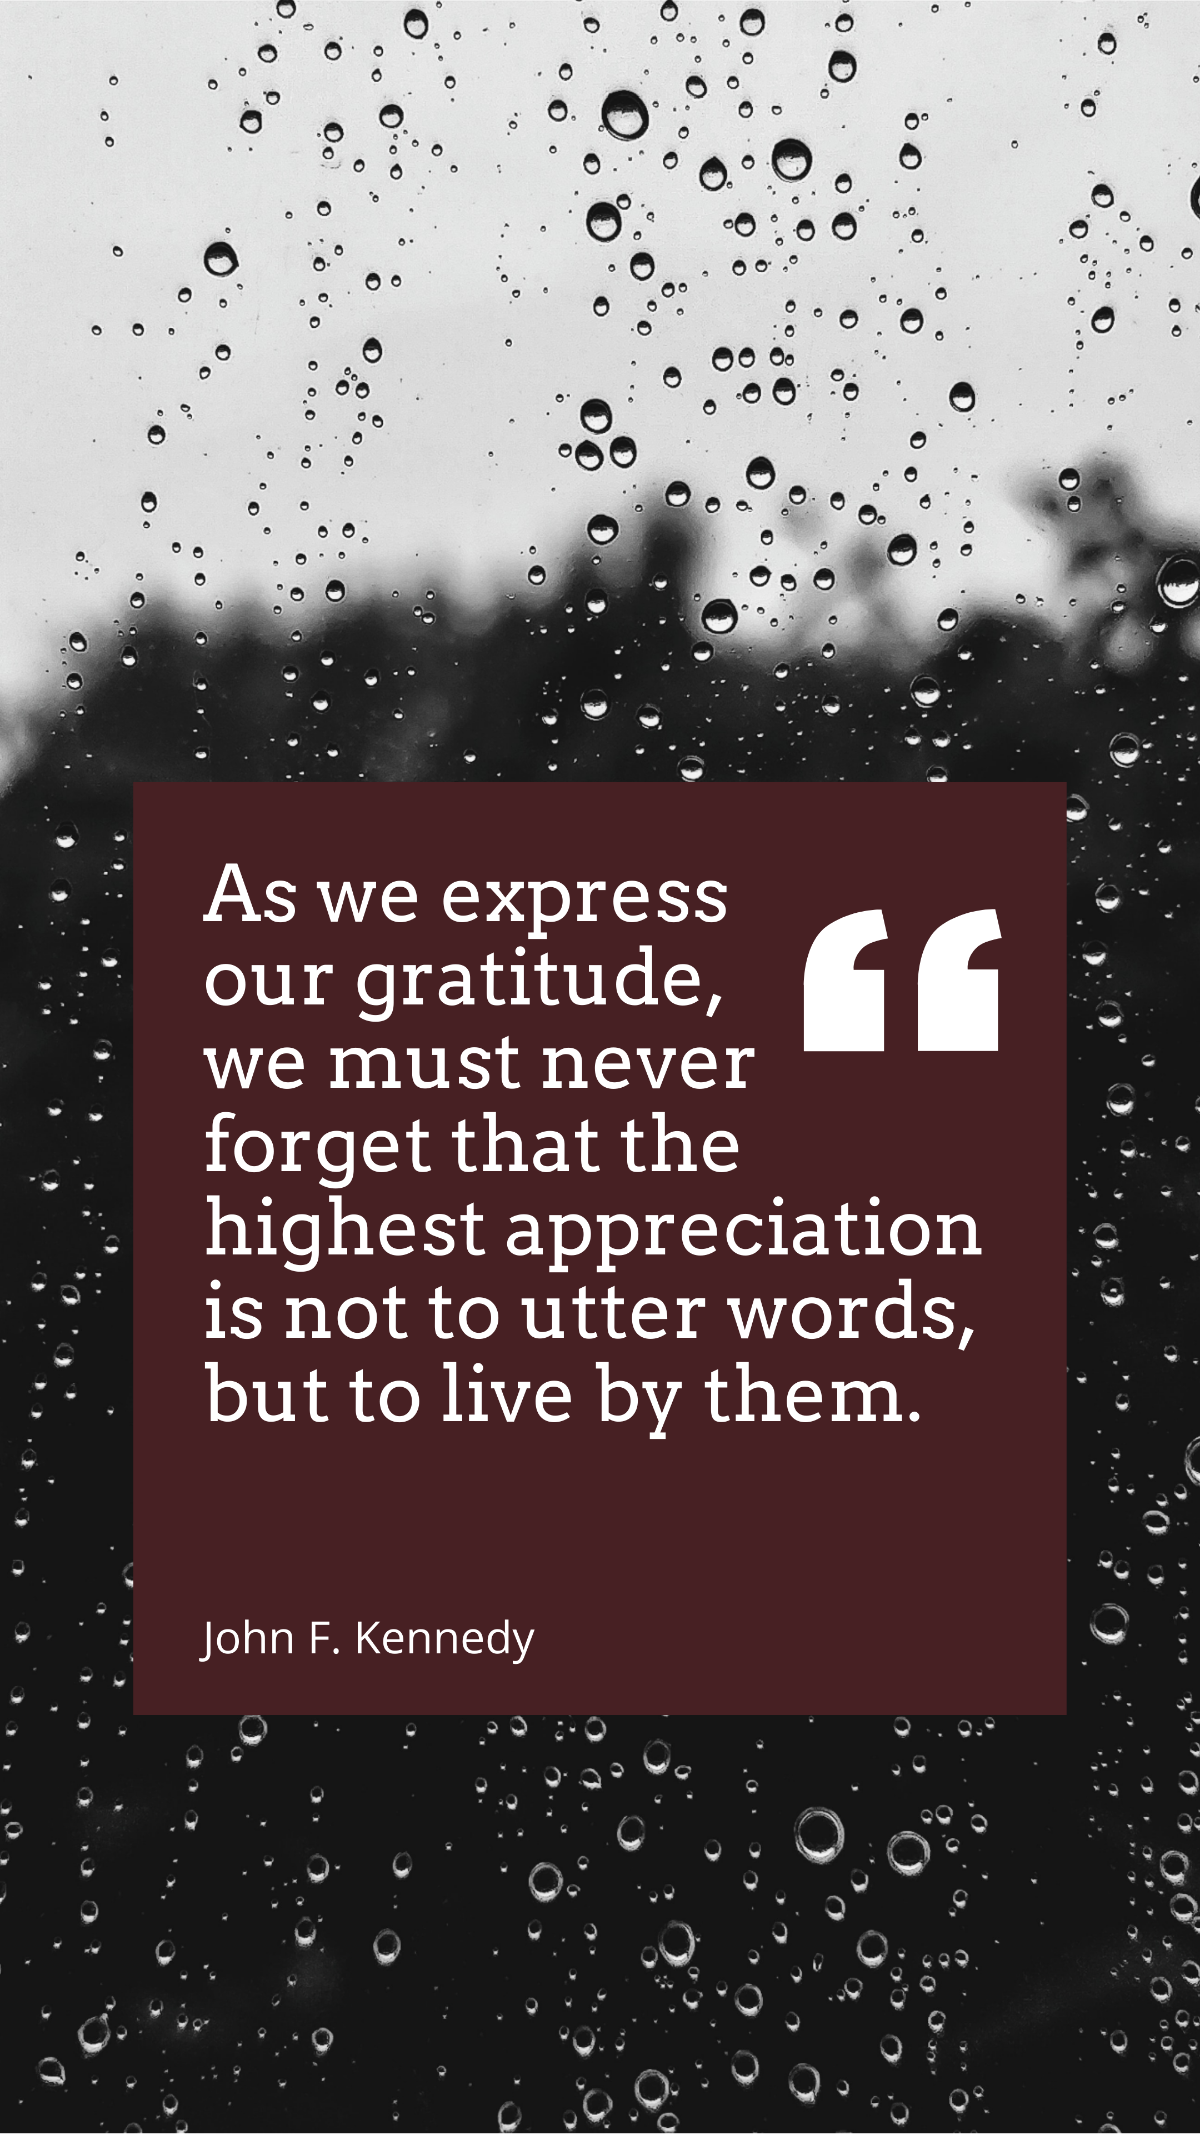 Free John F. Kennedy - As we express our gratitude, we must never forget that the highest appreciation is not to utter words, but to live by them. Template